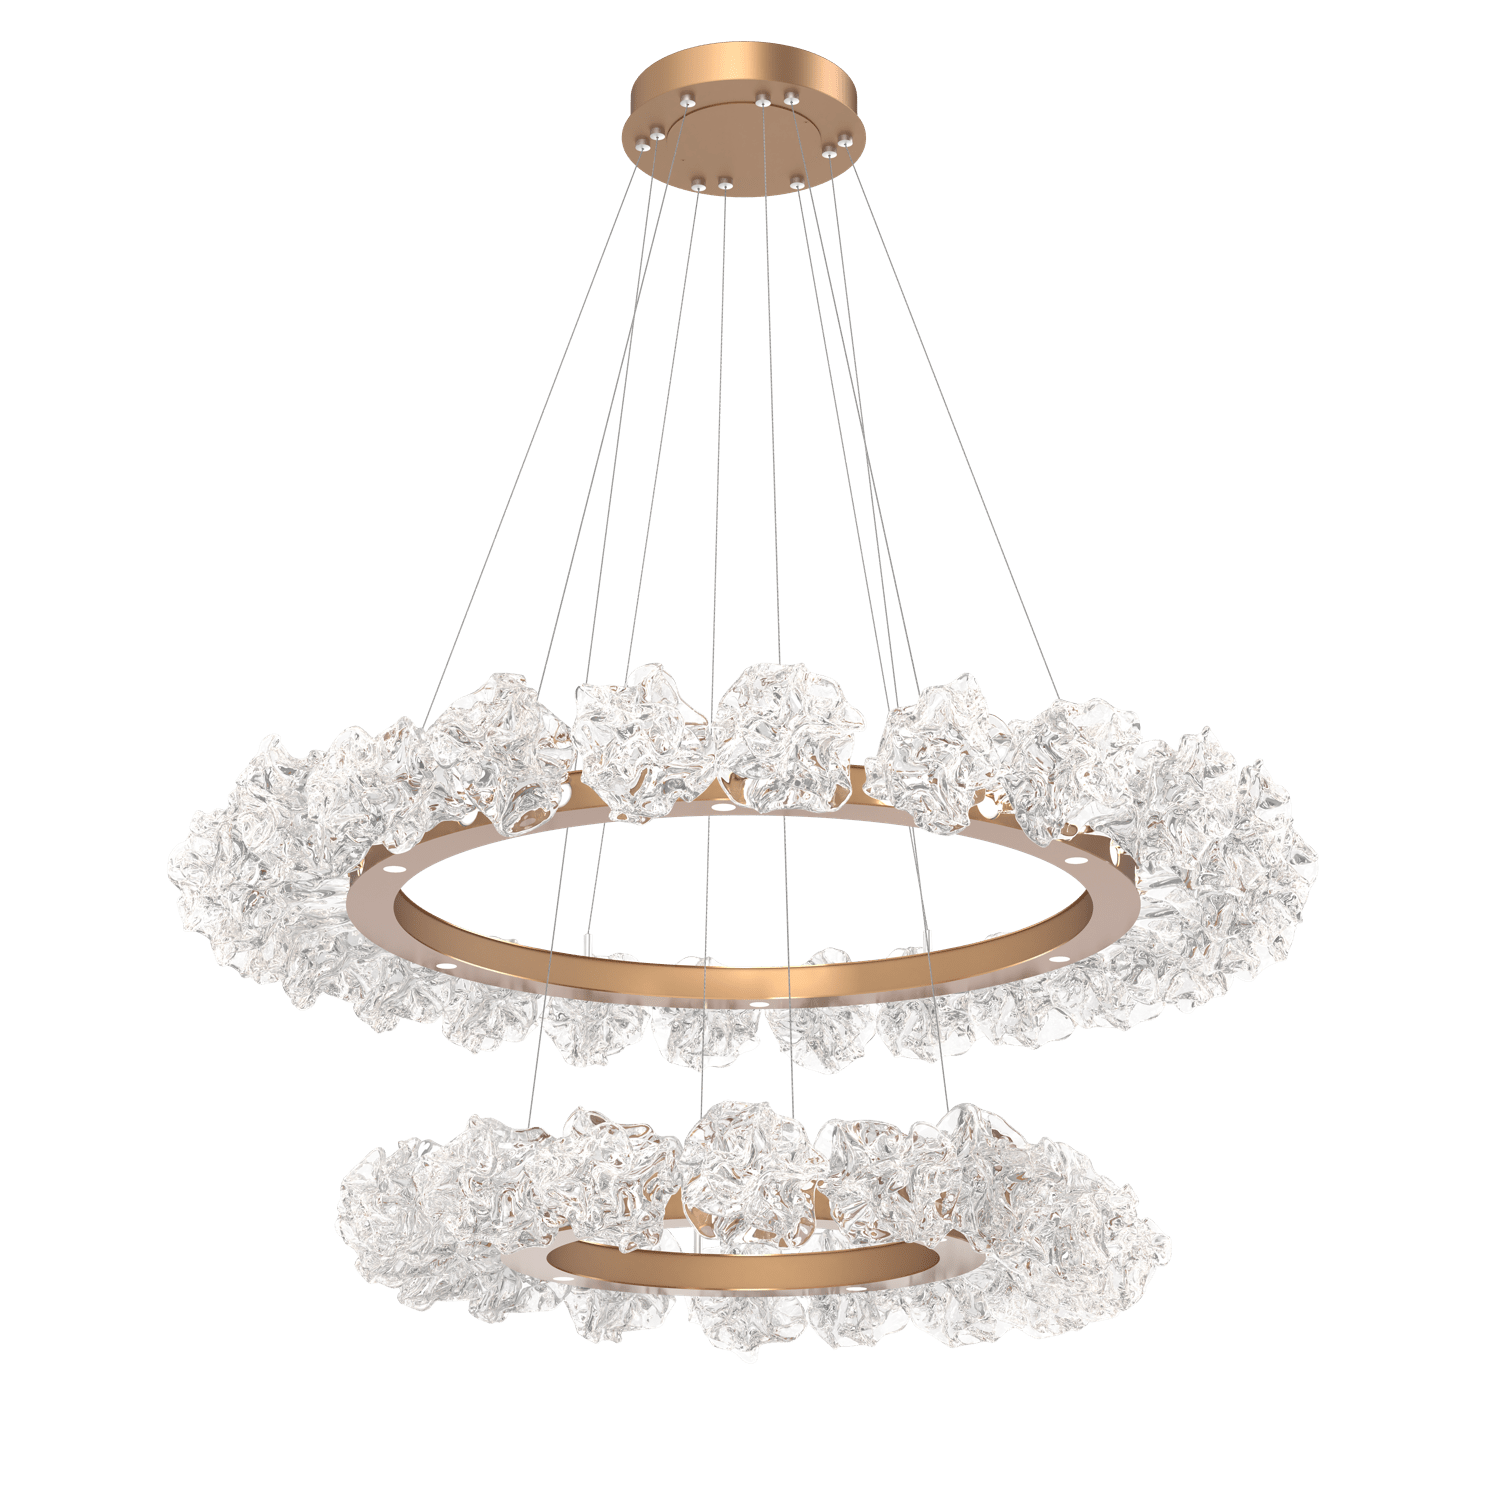 CHB0059-2B-NB-Hammerton-Studio-Blossom-50-inch-two-tier-radial-ring-chandelier-with-novel-brass-finish-and-clear-handblown-crystal-glass-shades-and-LED-lamping